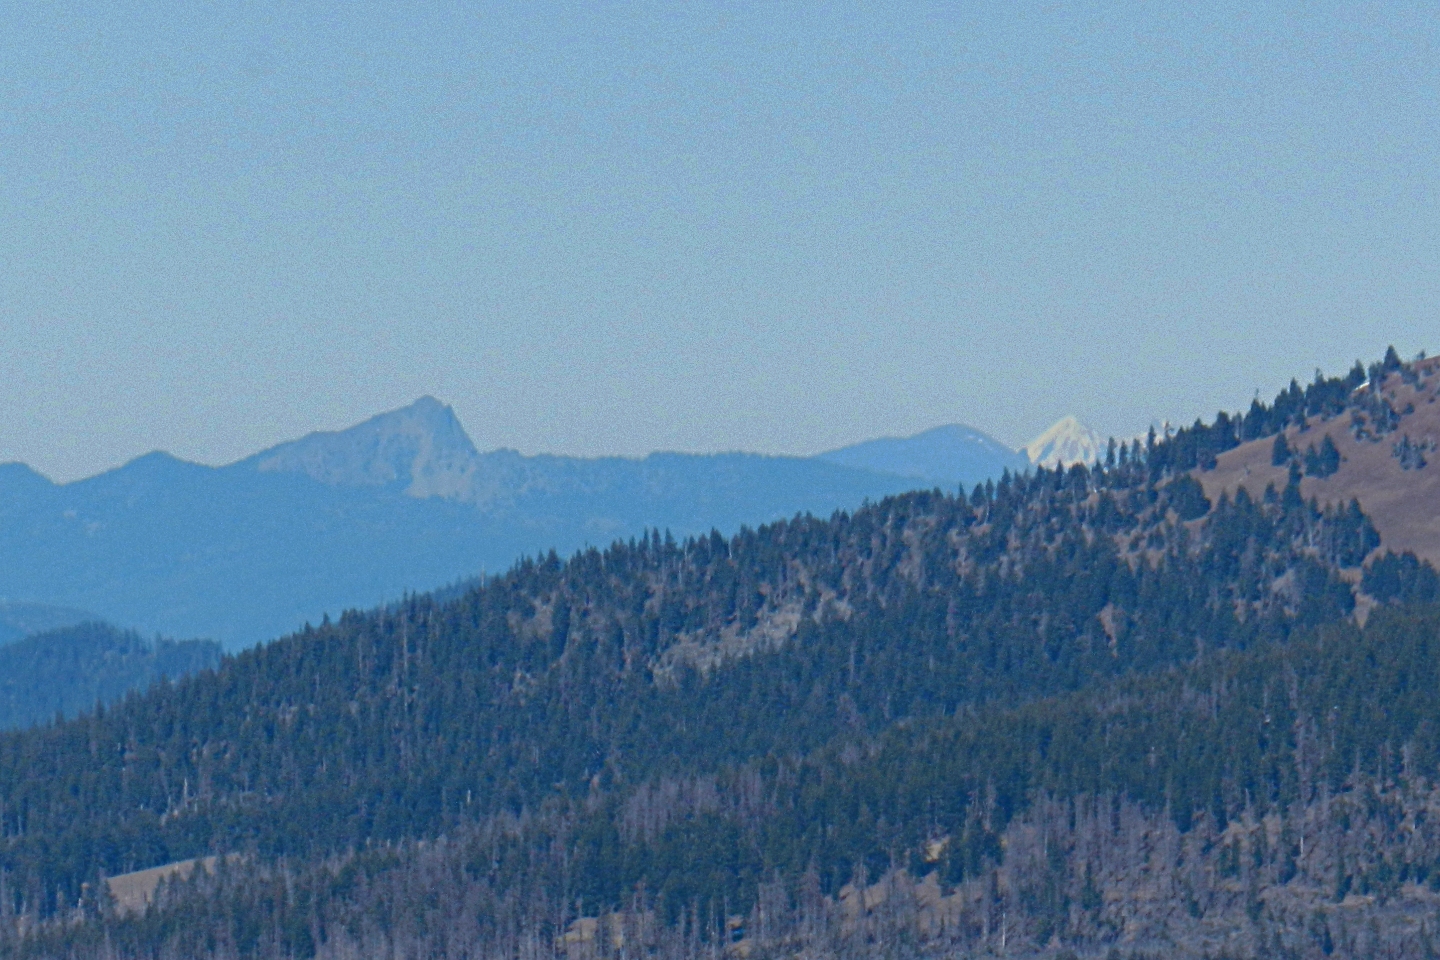 Cowhorn Mtn, Maiden Peak and the Sisters